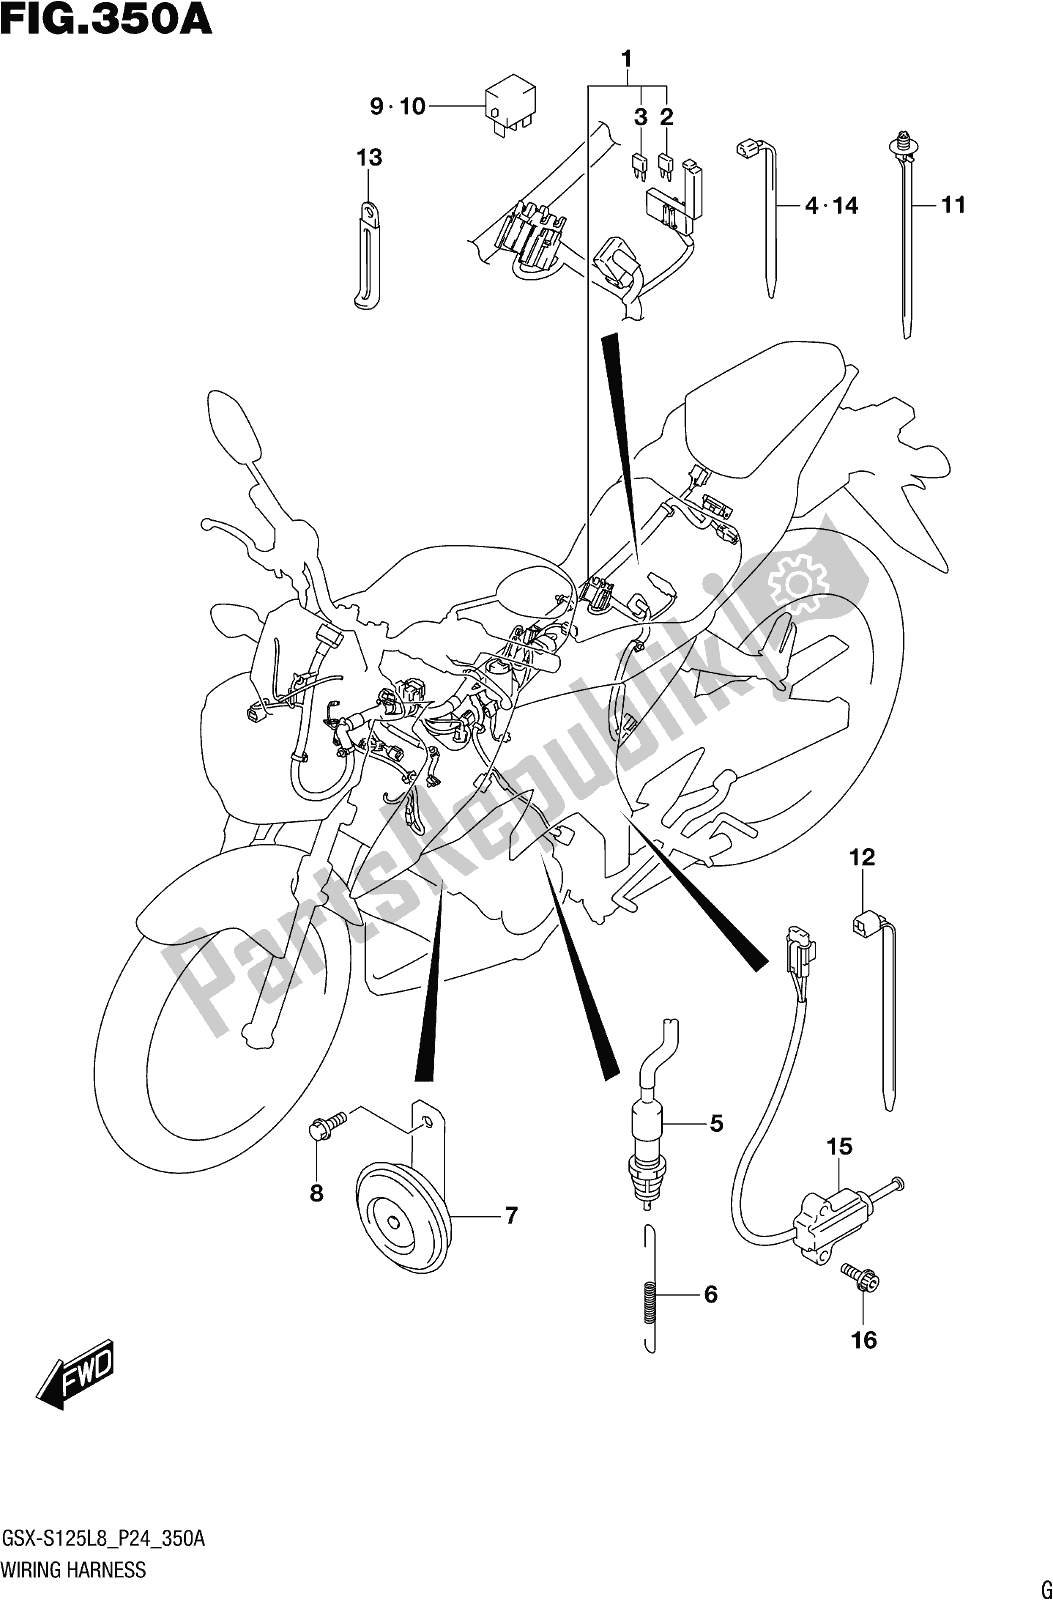 All parts for the Fig. 350a Wiring Harness of the Suzuki Gsx-s 125 MLX 2018